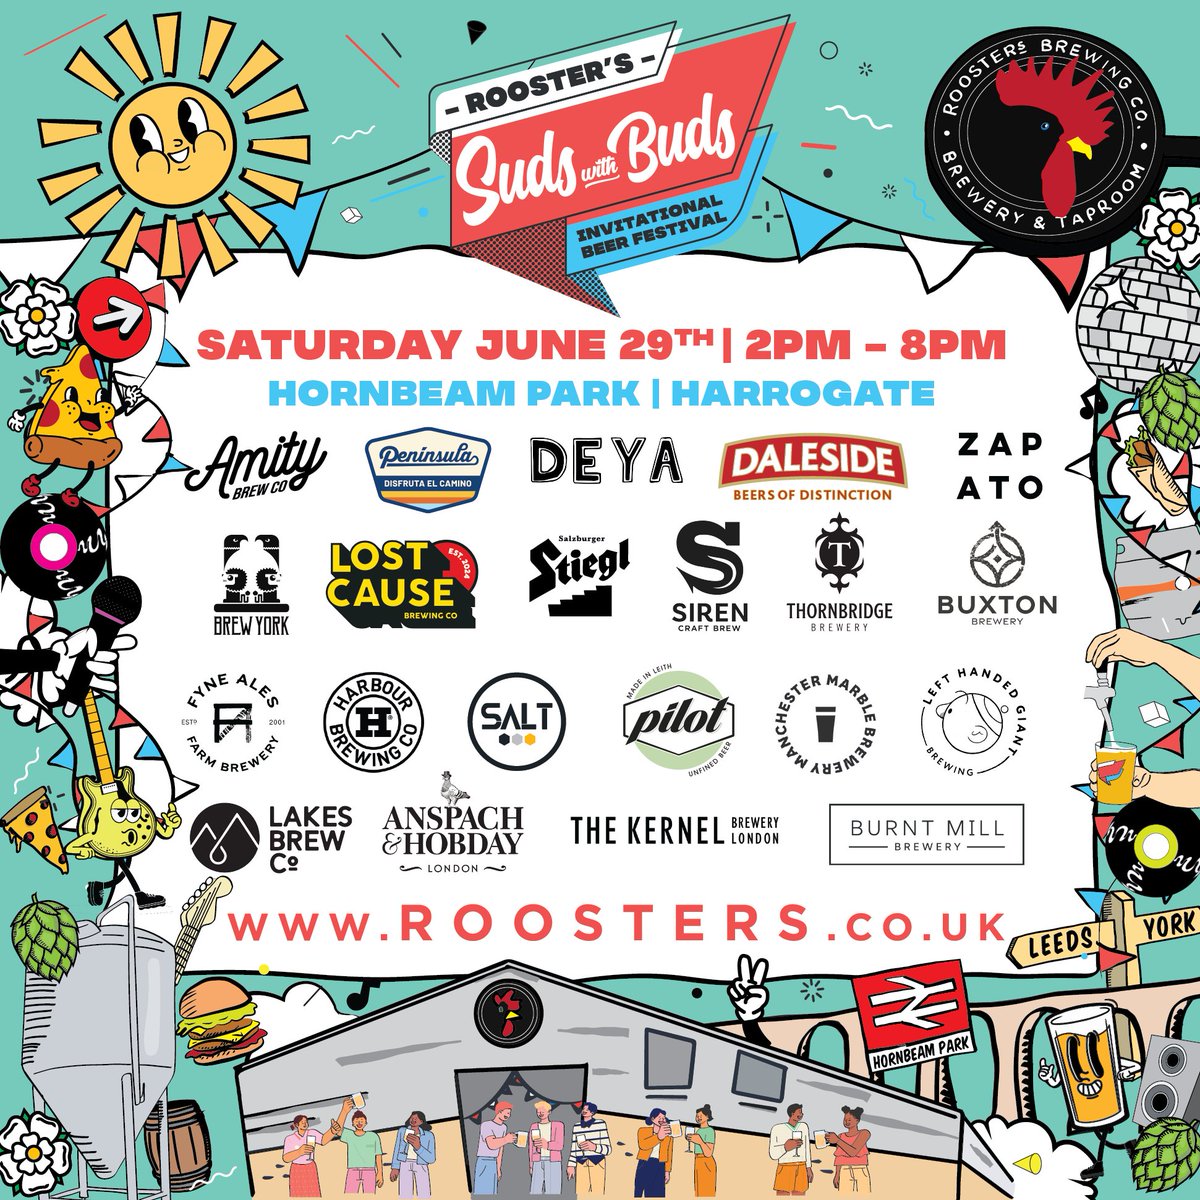 Missed the Suds With Buds lineup? Here's who we've got joining us on June 29th 🍻 Get ready for a day packed with great beer, live music & street food. Who's joining us? 🙌 roosters.co.uk/pages/suds-wit…